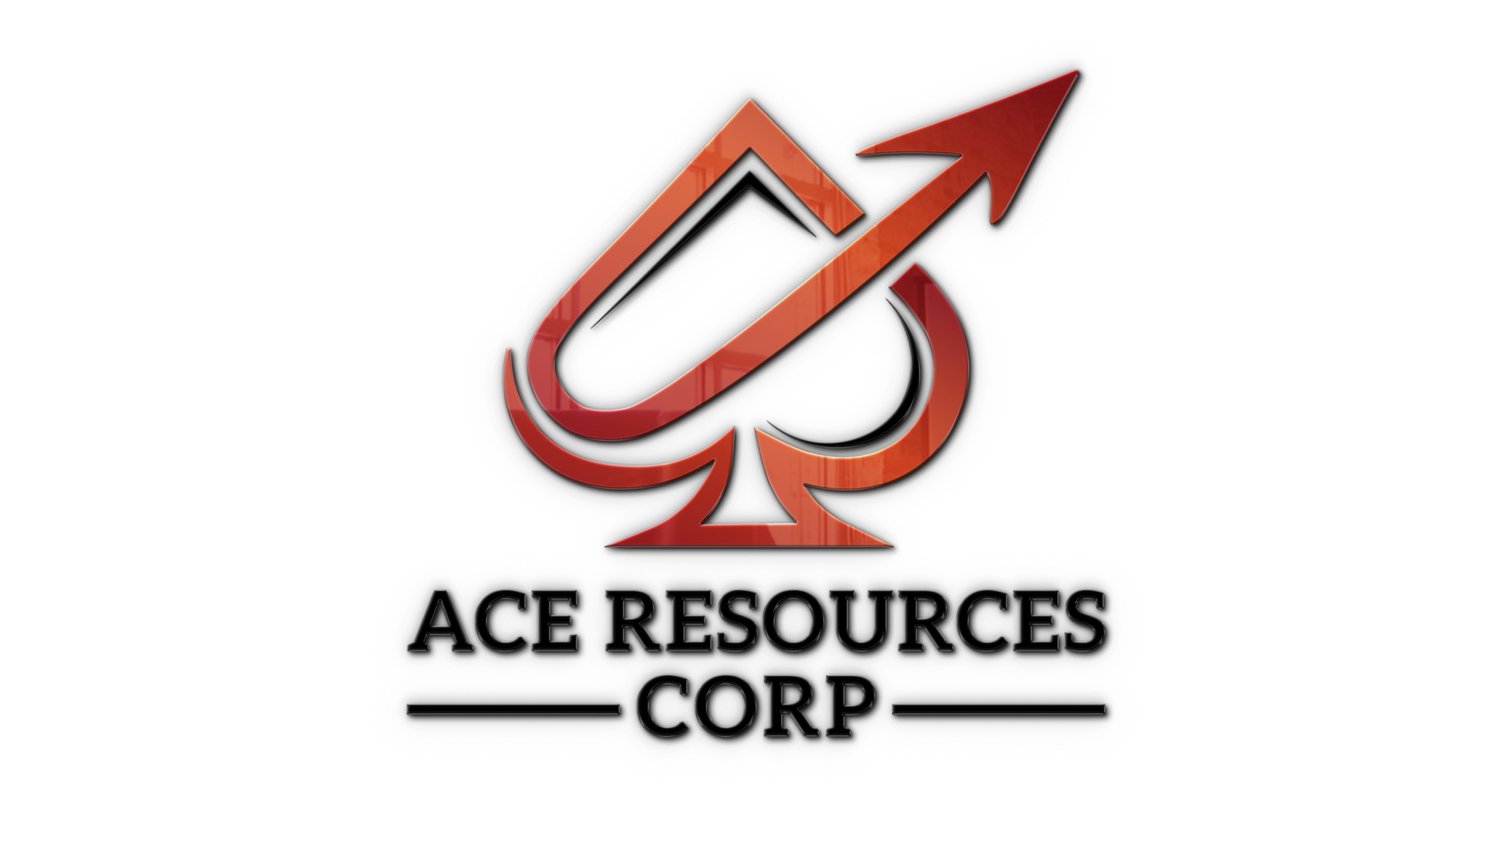 Ace Resources Corp